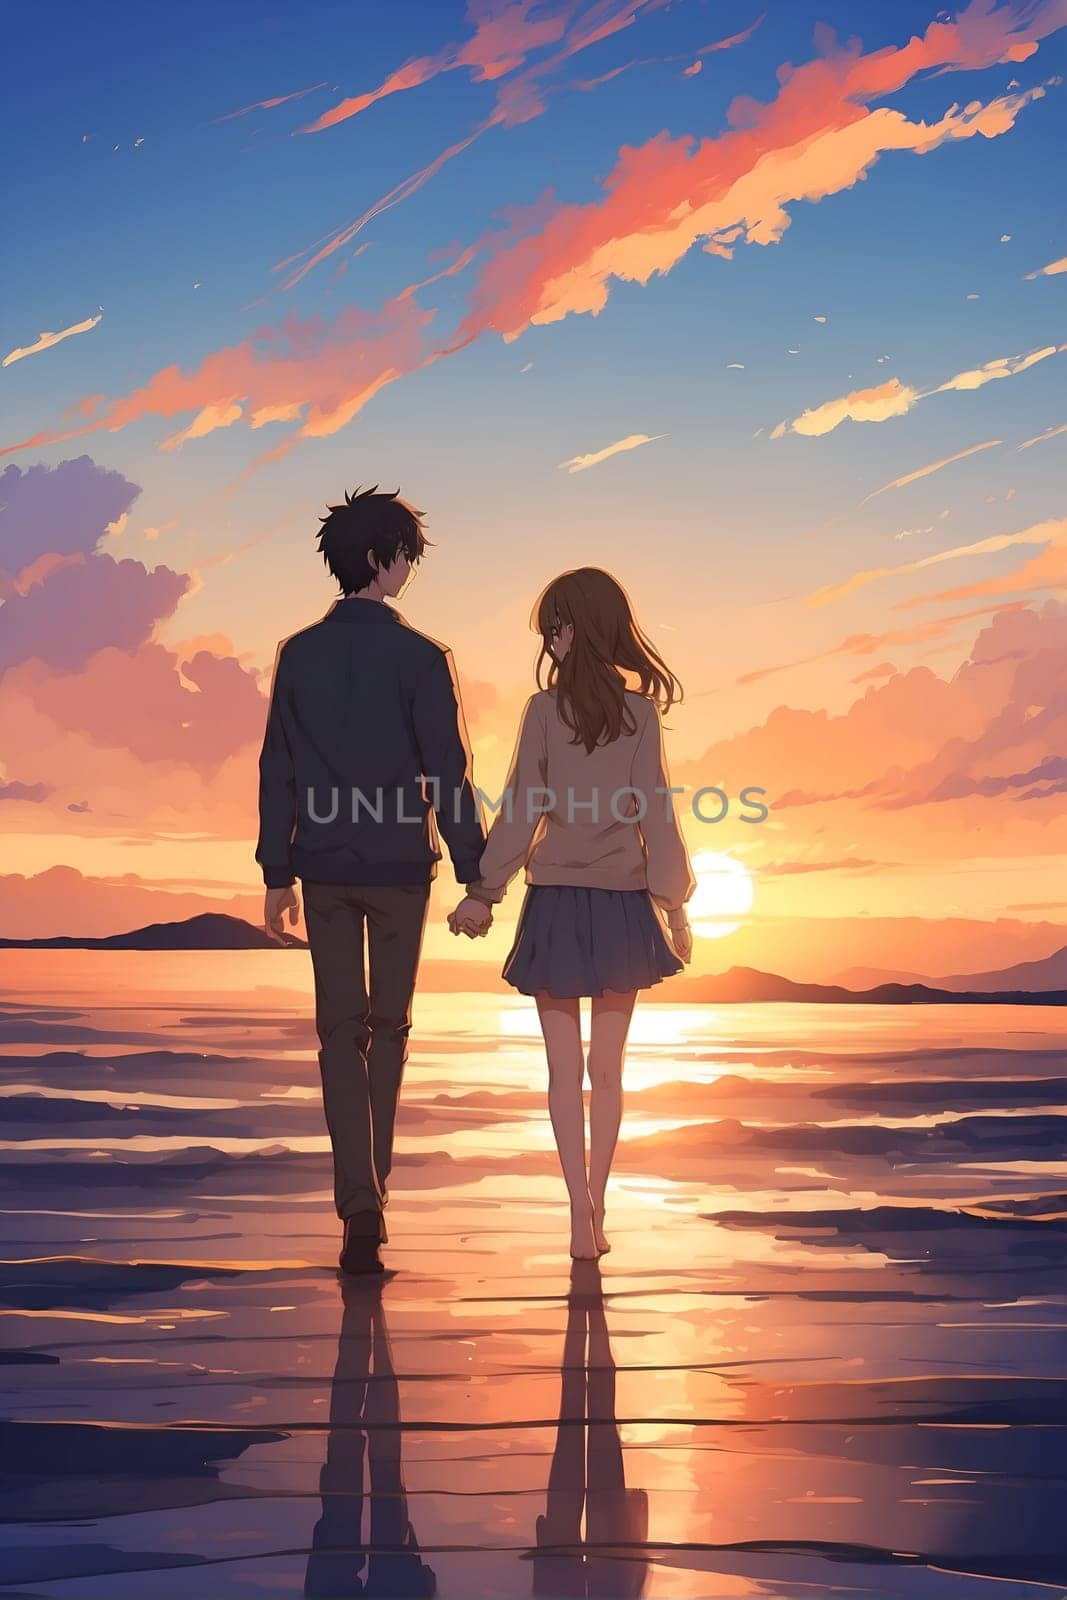 A man and a woman are depicted walking together along a beautiful beach as the sun sets in the background.